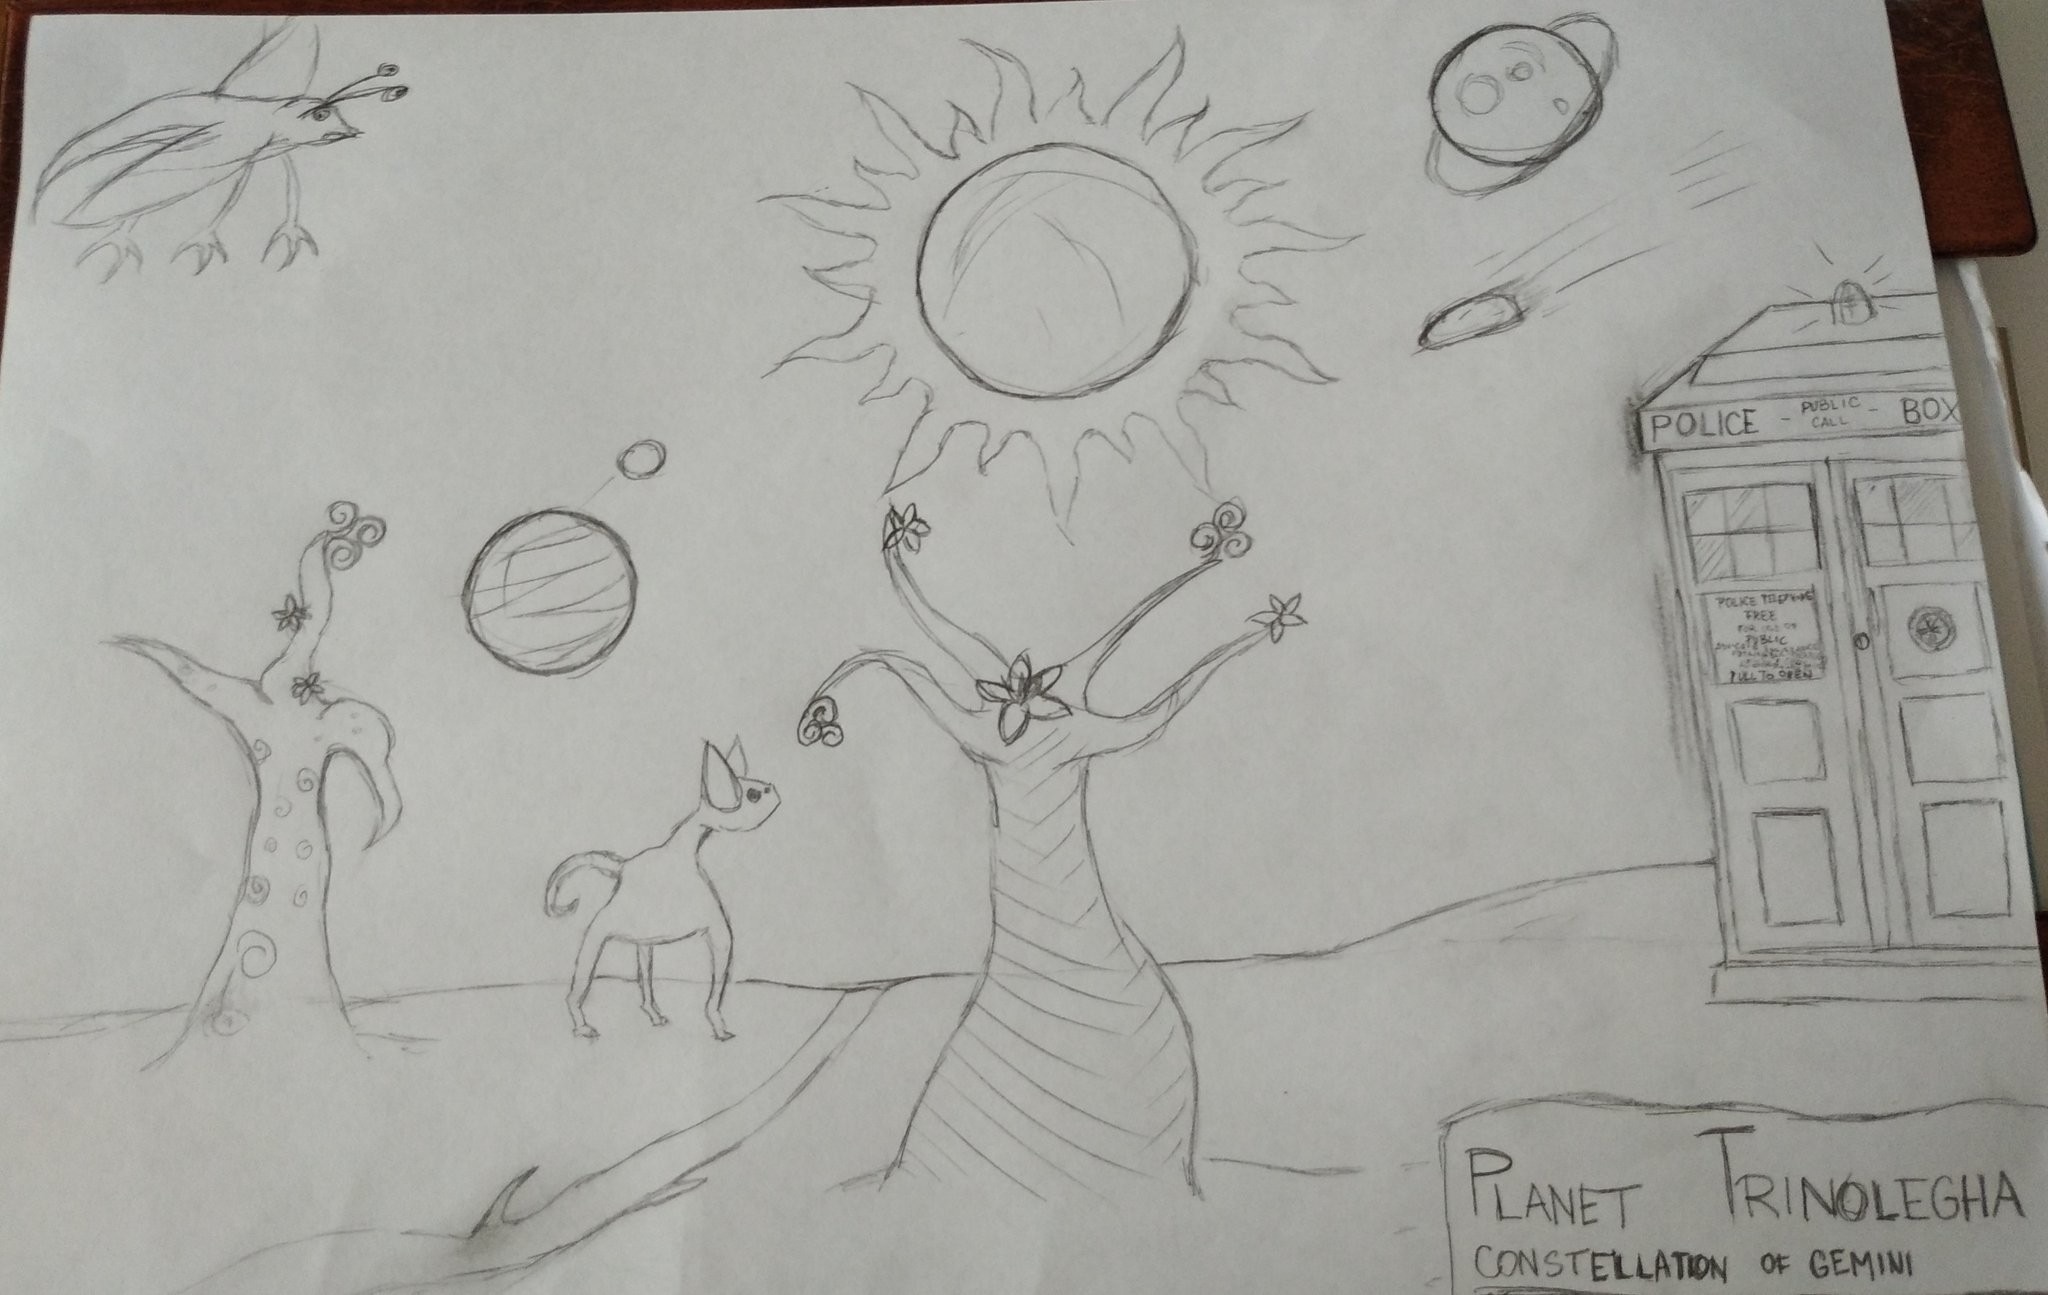 Image of a pencil drawing of an alien planet with alien trees, animals, planets in the sky and the TARDIS